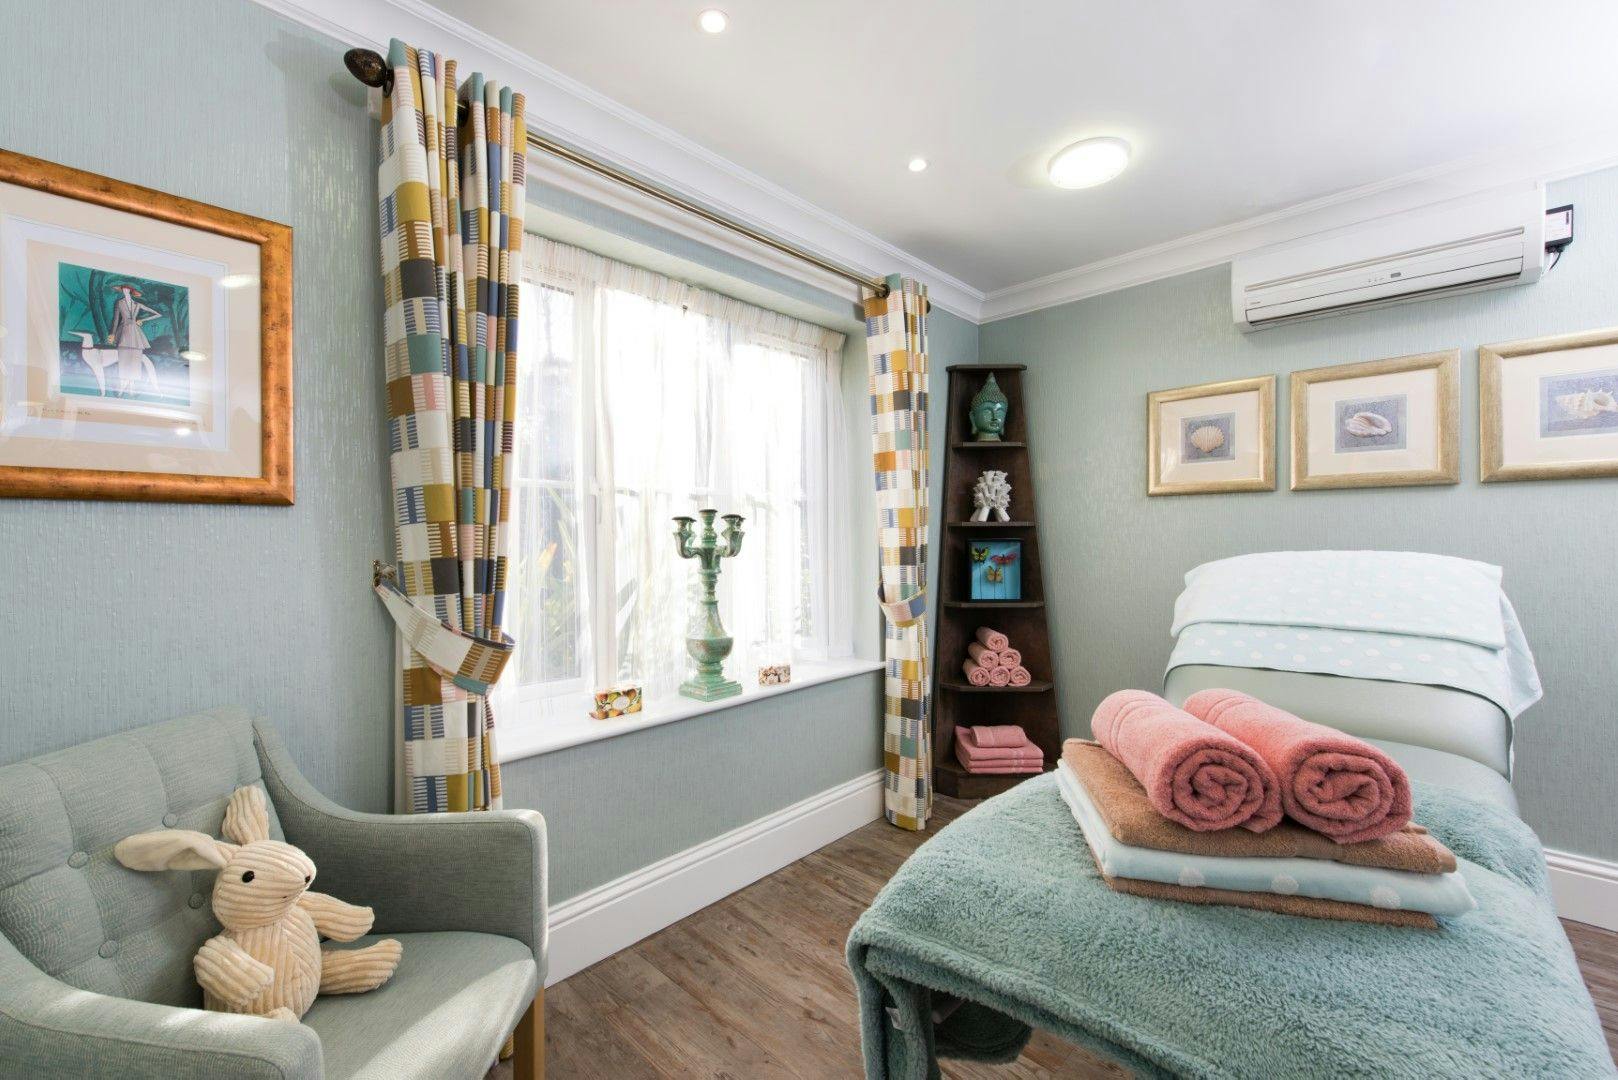 Spa at Lakeview Care Home in Surrey, South East England